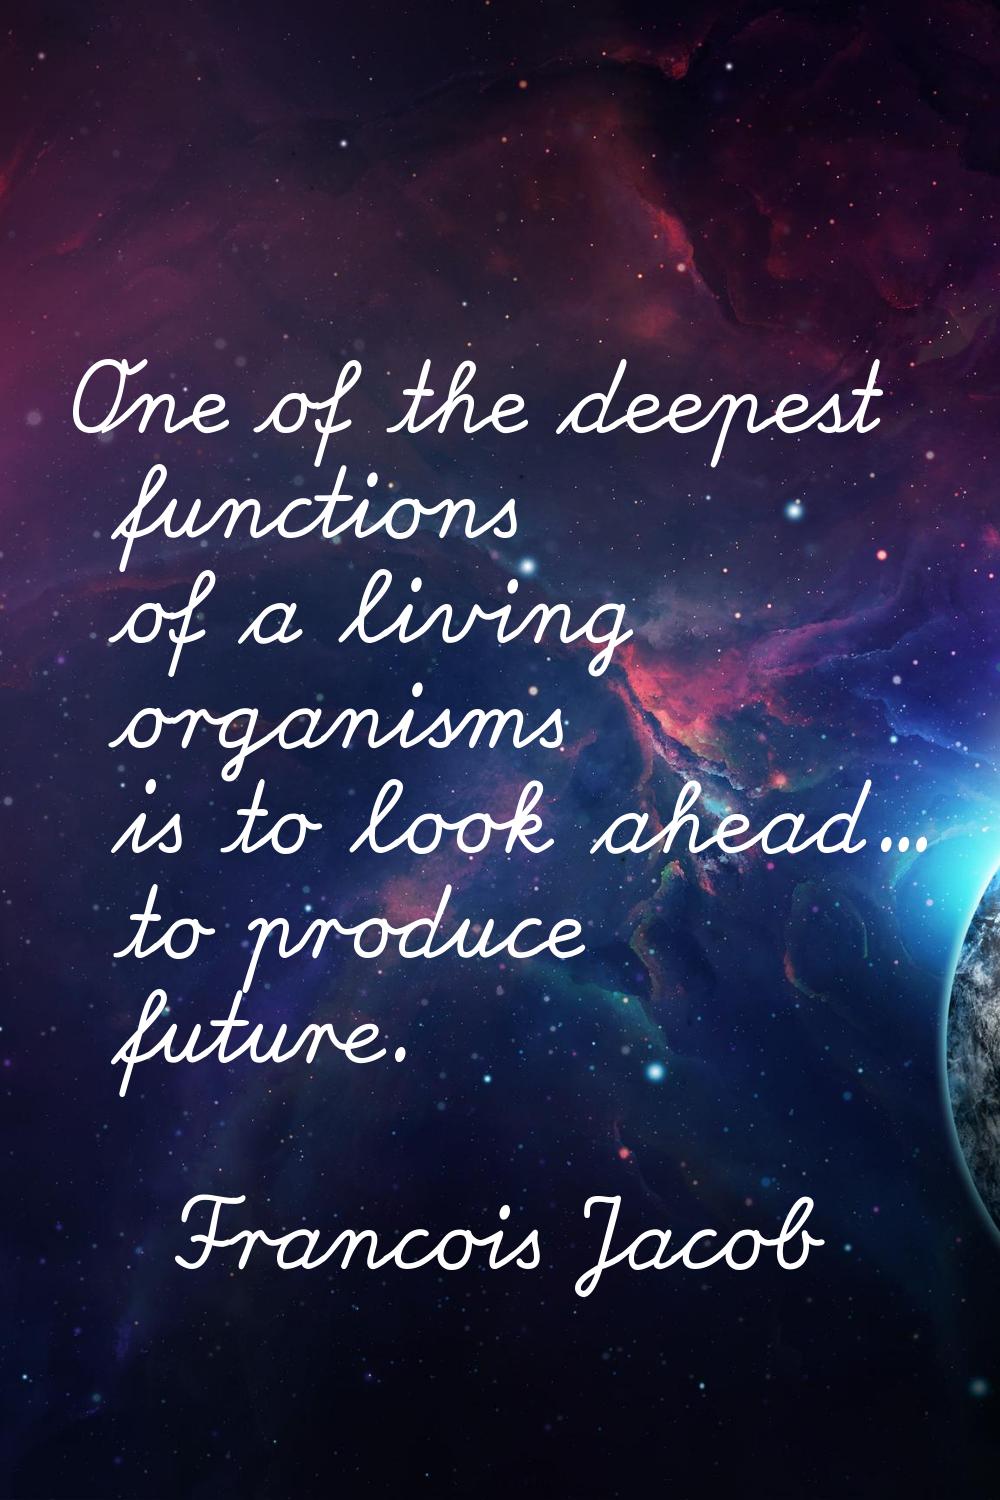 One of the deepest functions of a living organisms is to look ahead... to produce future.